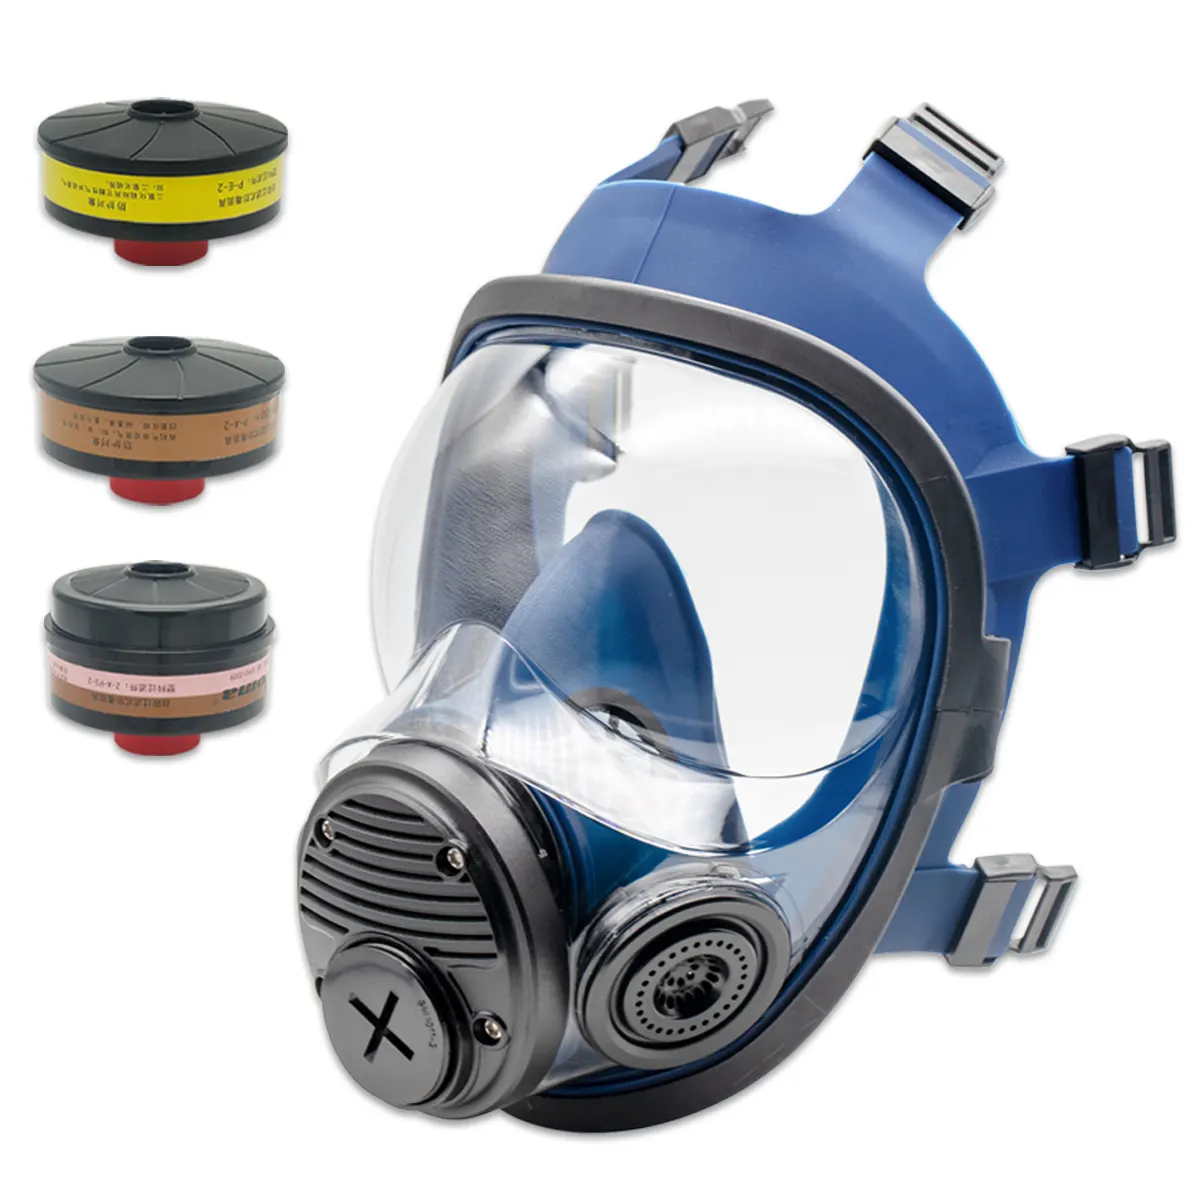 PPE Safety Equipment Fashion Against Radiat Dust Fighting Emergency Double Particle Filter Full Face Rebreather Gas Masks